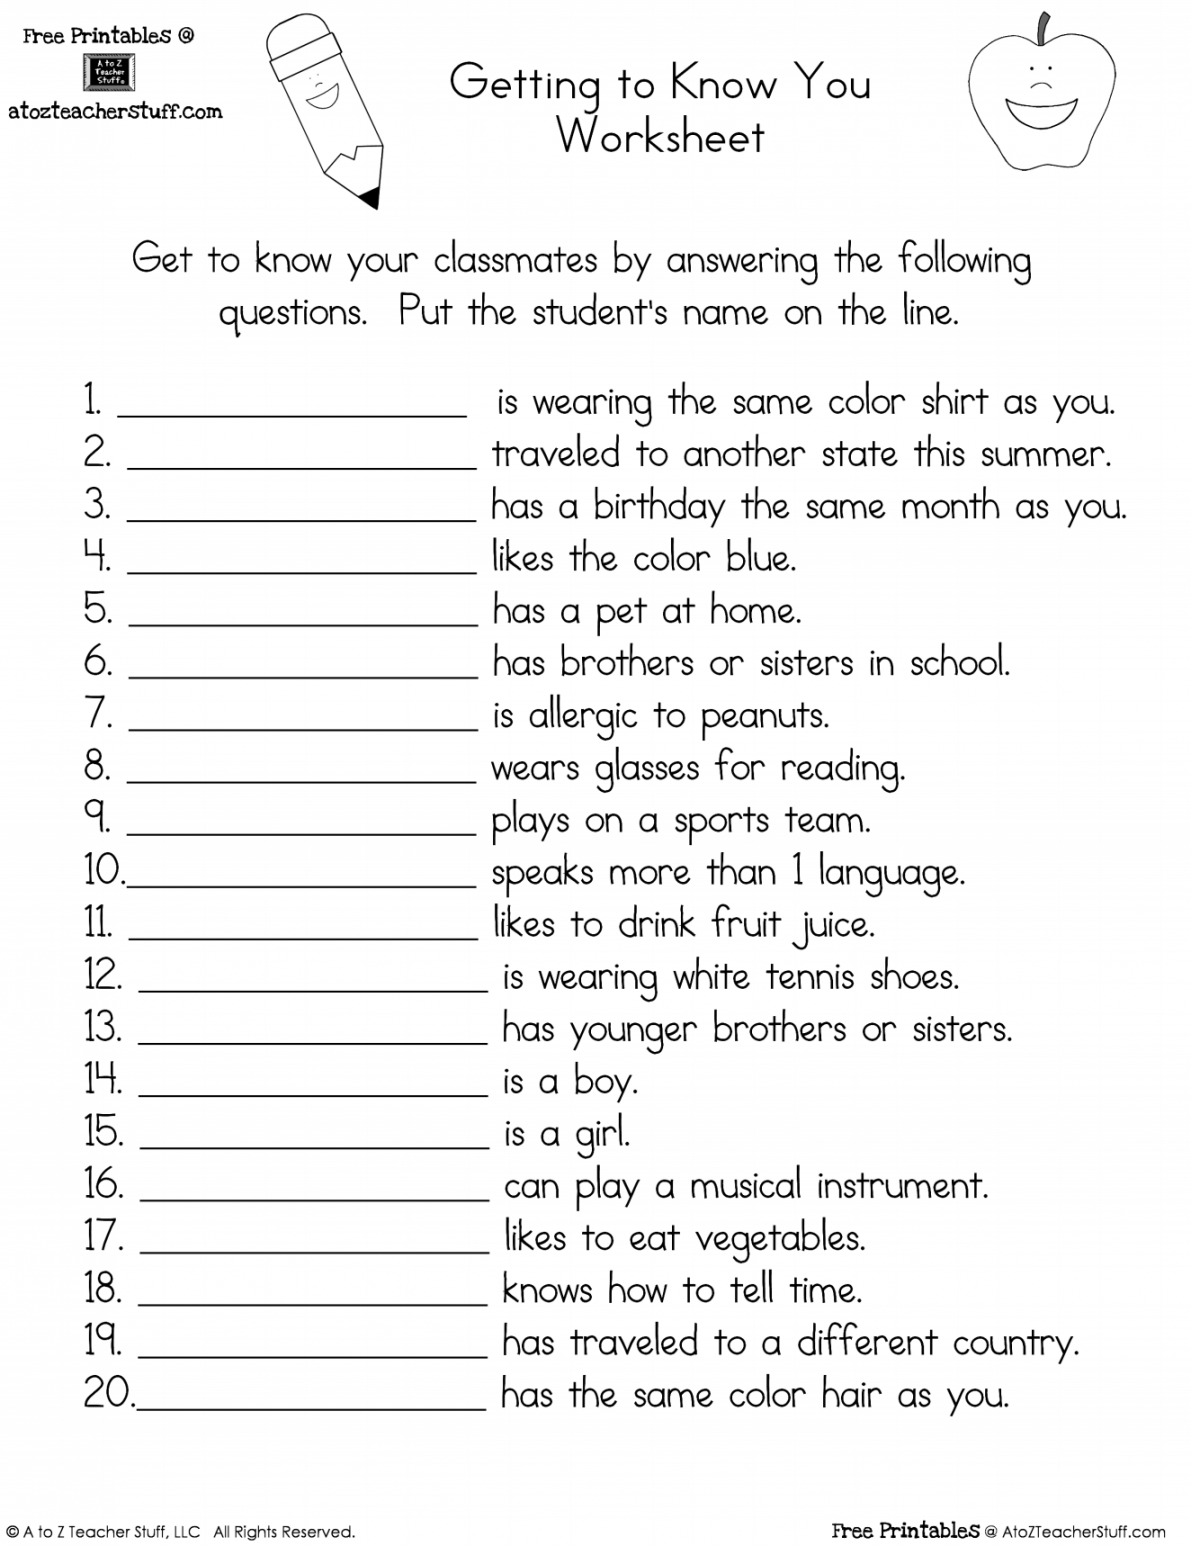 Getting to Know You Worksheet  A to Z Teacher Stuff Printable  - FREE Printables - Free Printable Get To Know You Worksheet